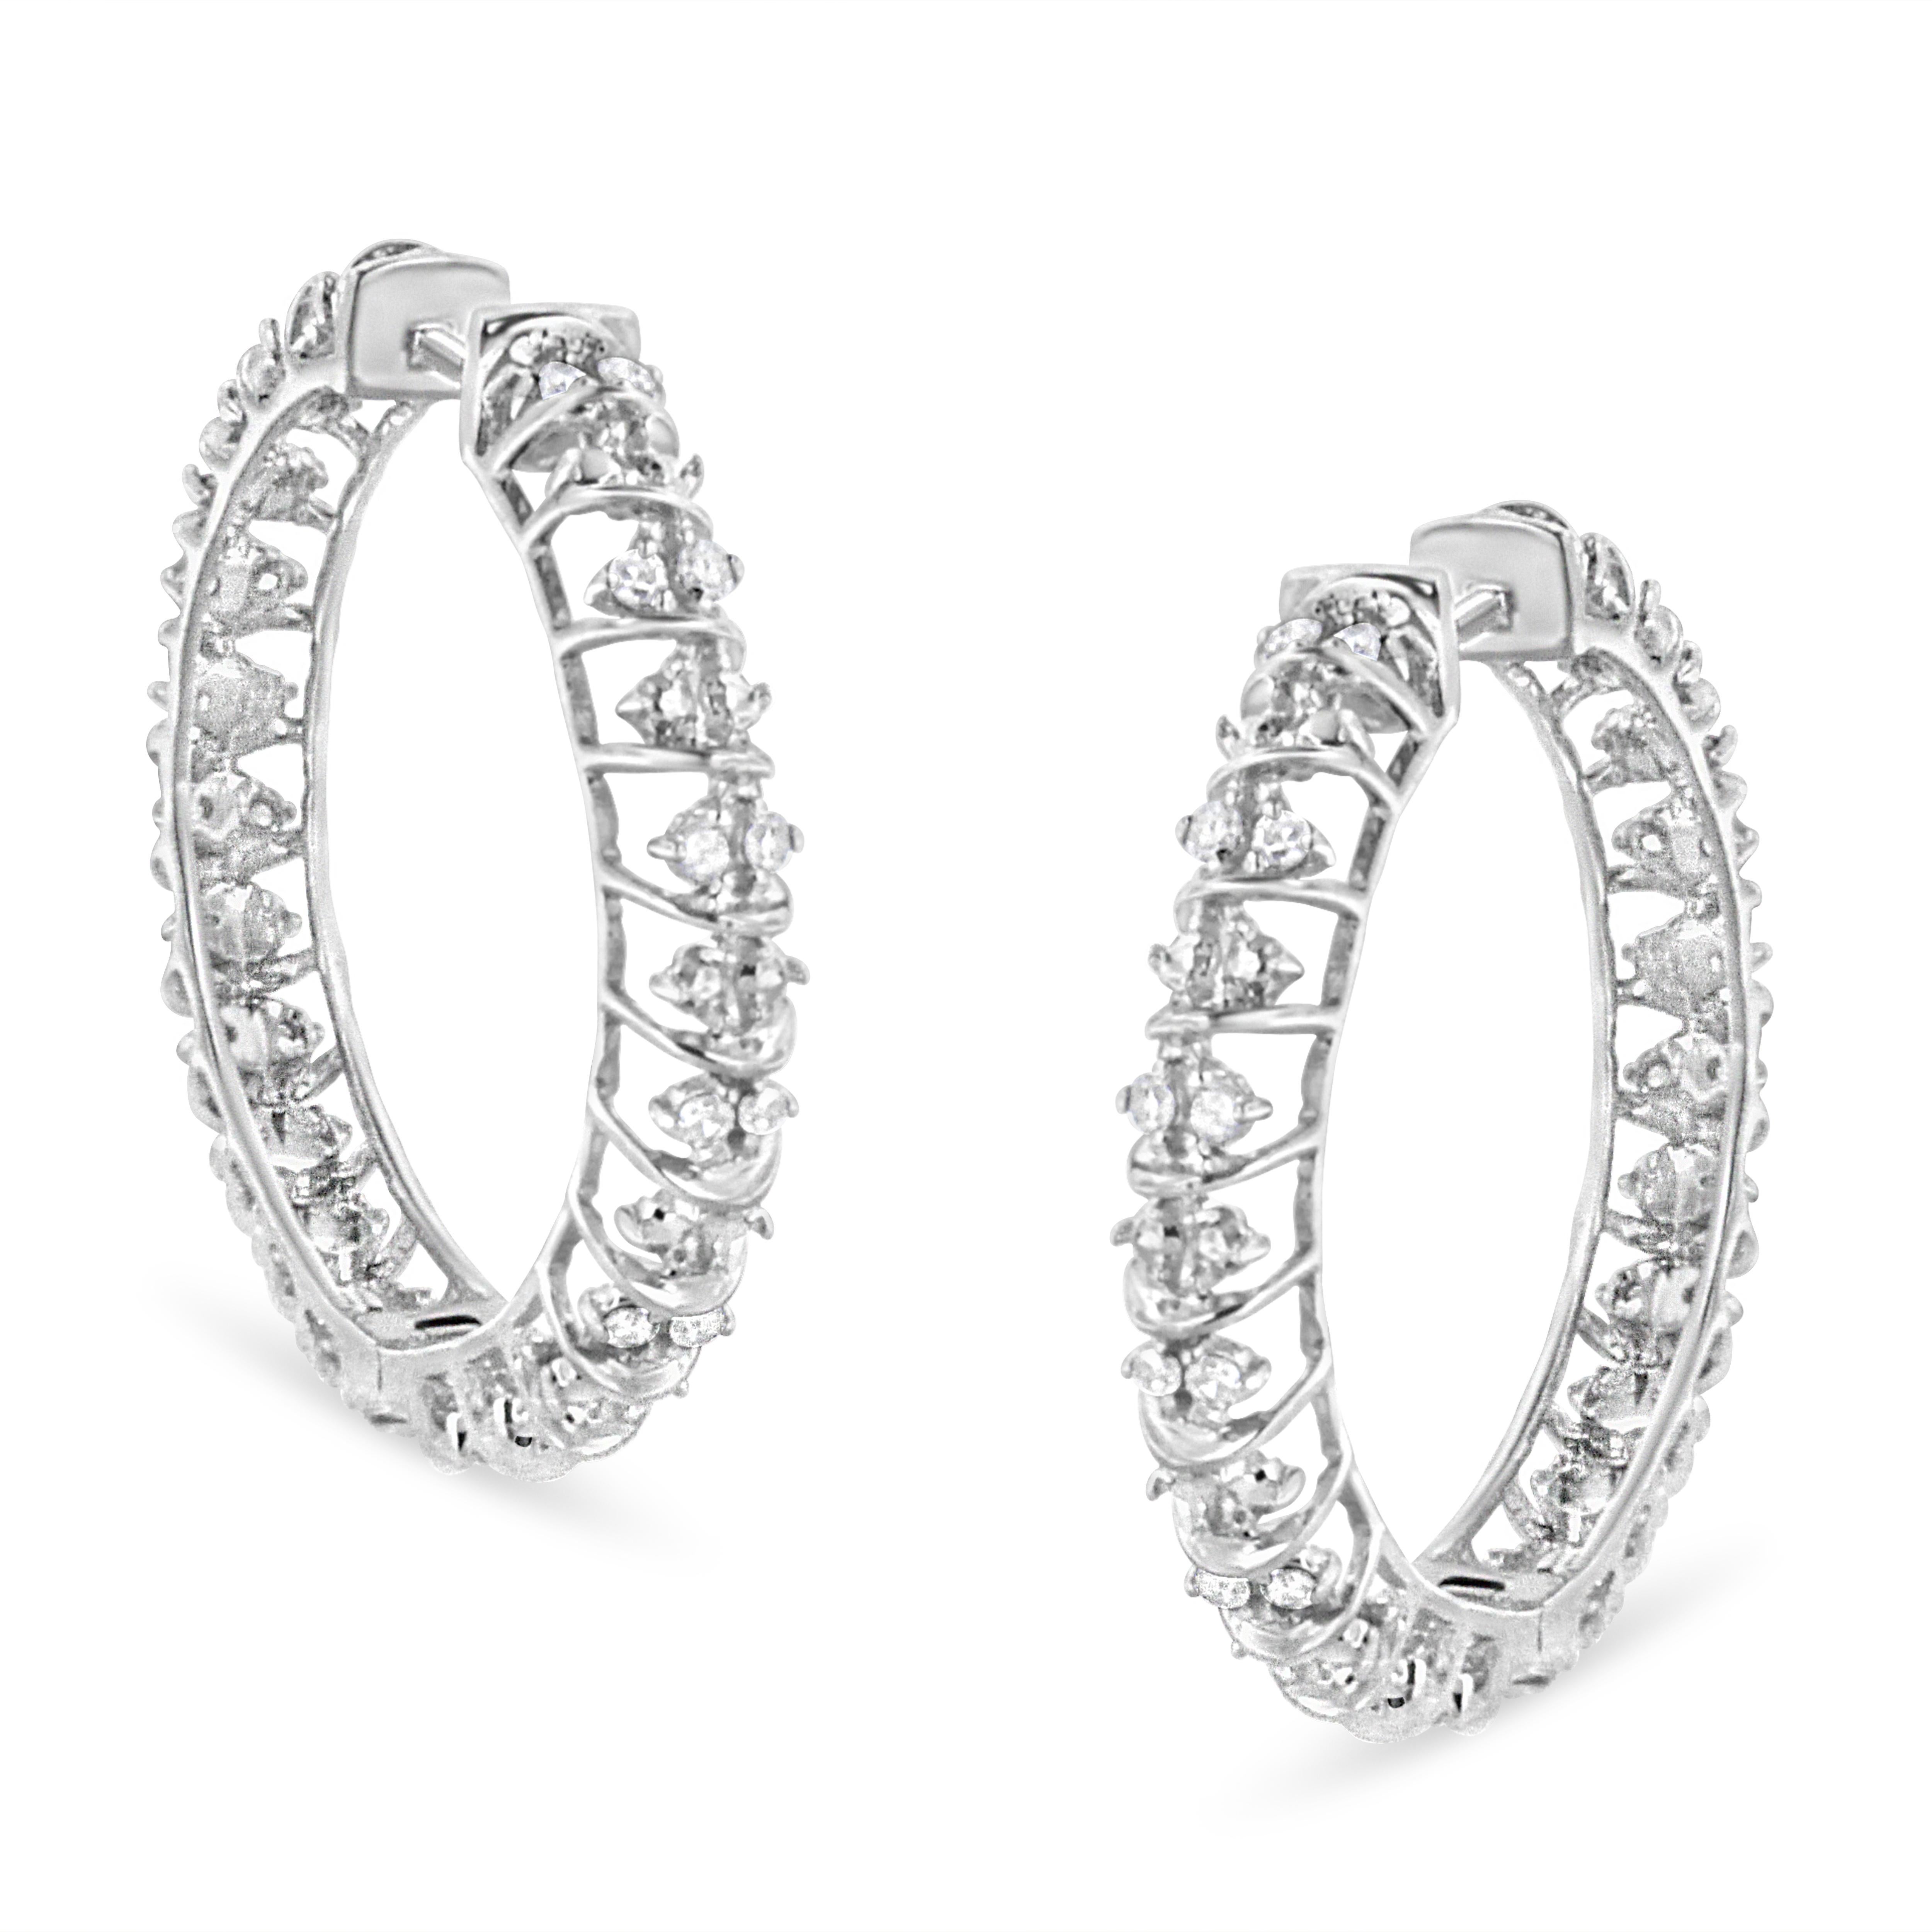 Hoop earrings will always have a special place in our hearts, but this pair takes it to the next level. They feature a cage-like design in .925 Sterling Silver that holds 44 round natural diamonds in a prong setting that total up to 1/2 carat